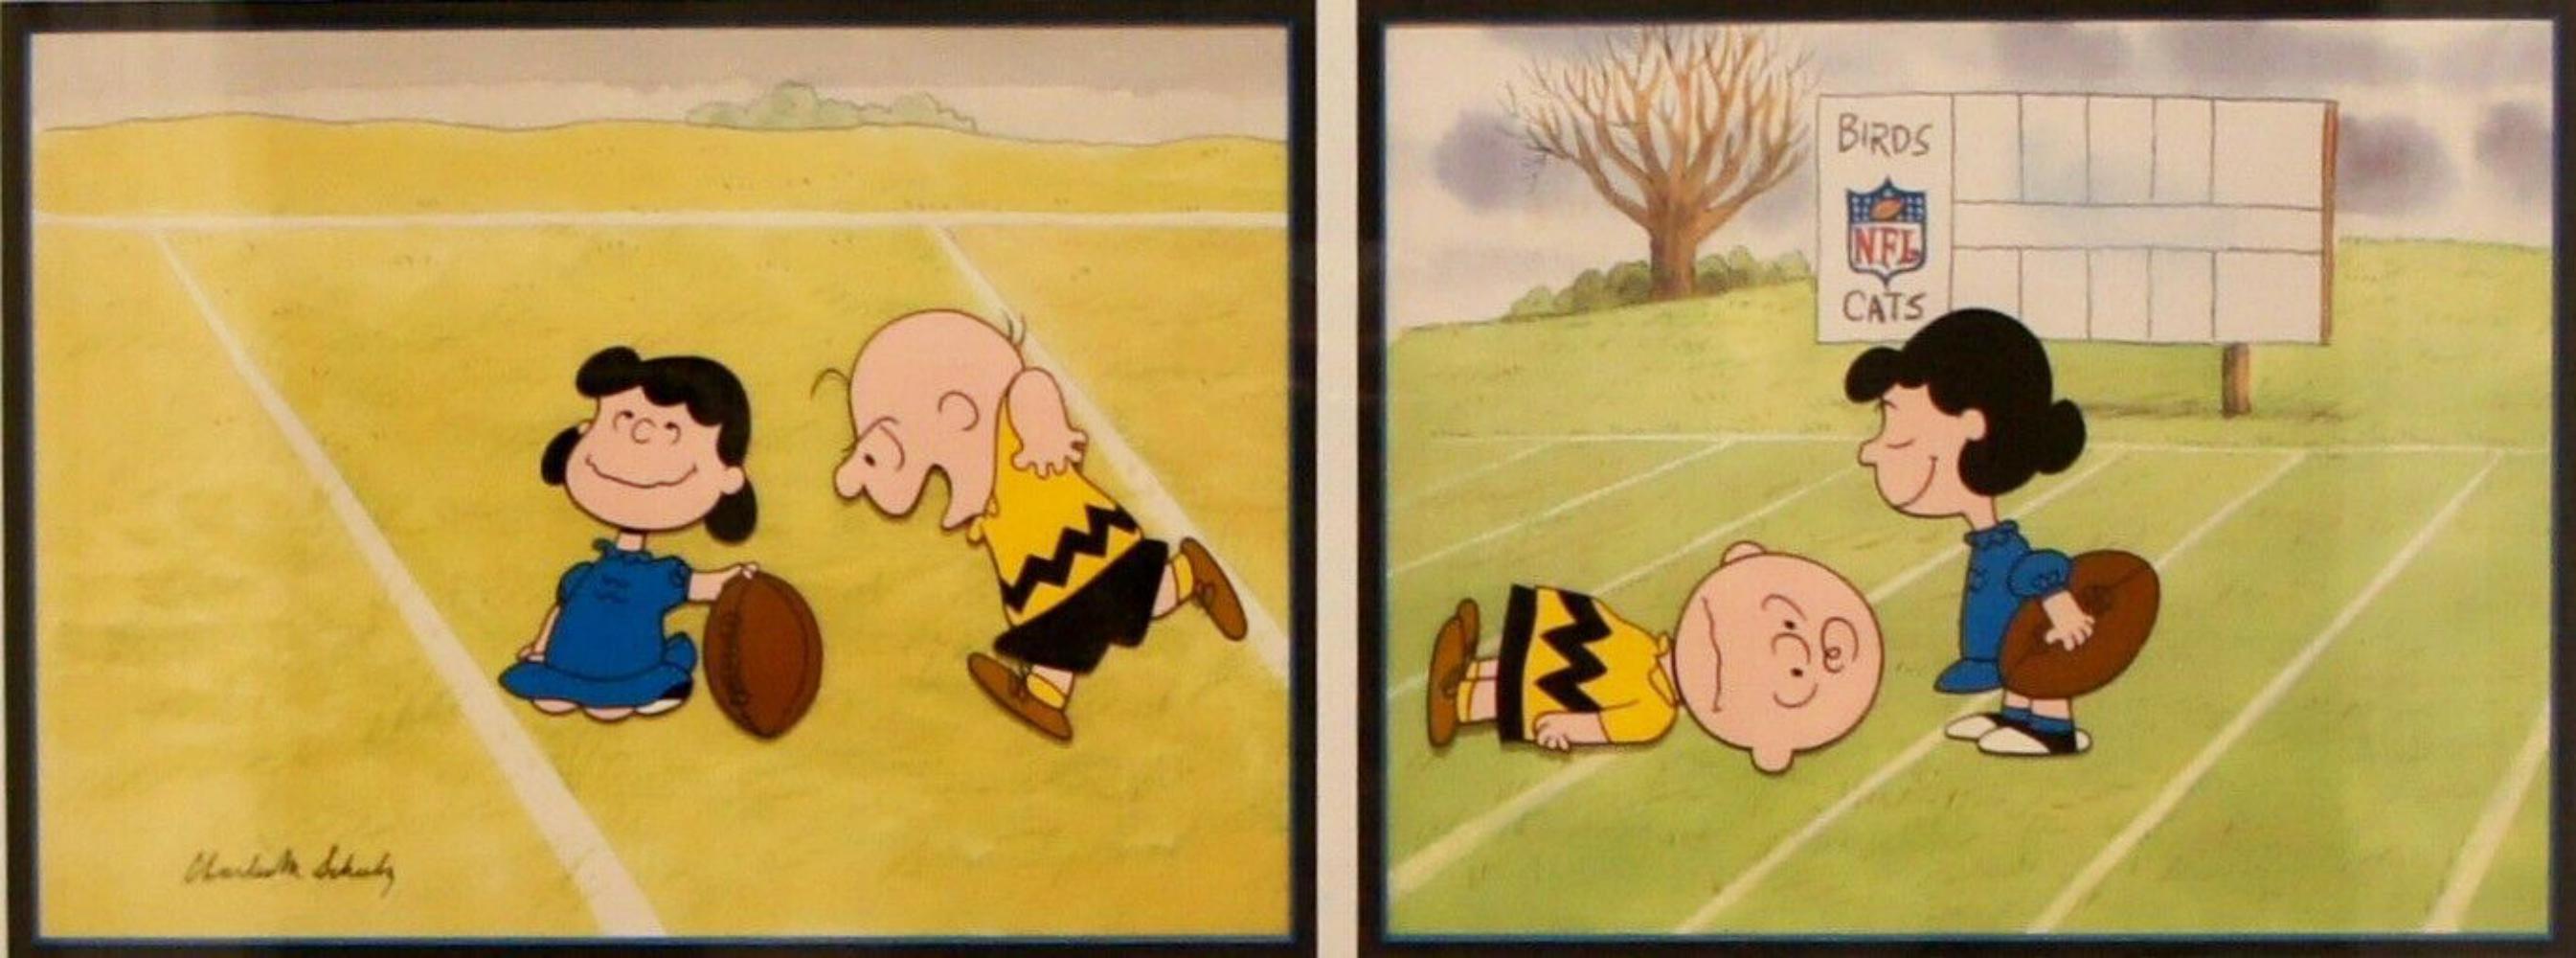 Charlie Brown and Lucy Classic Football - Art by Charles M. Schulz